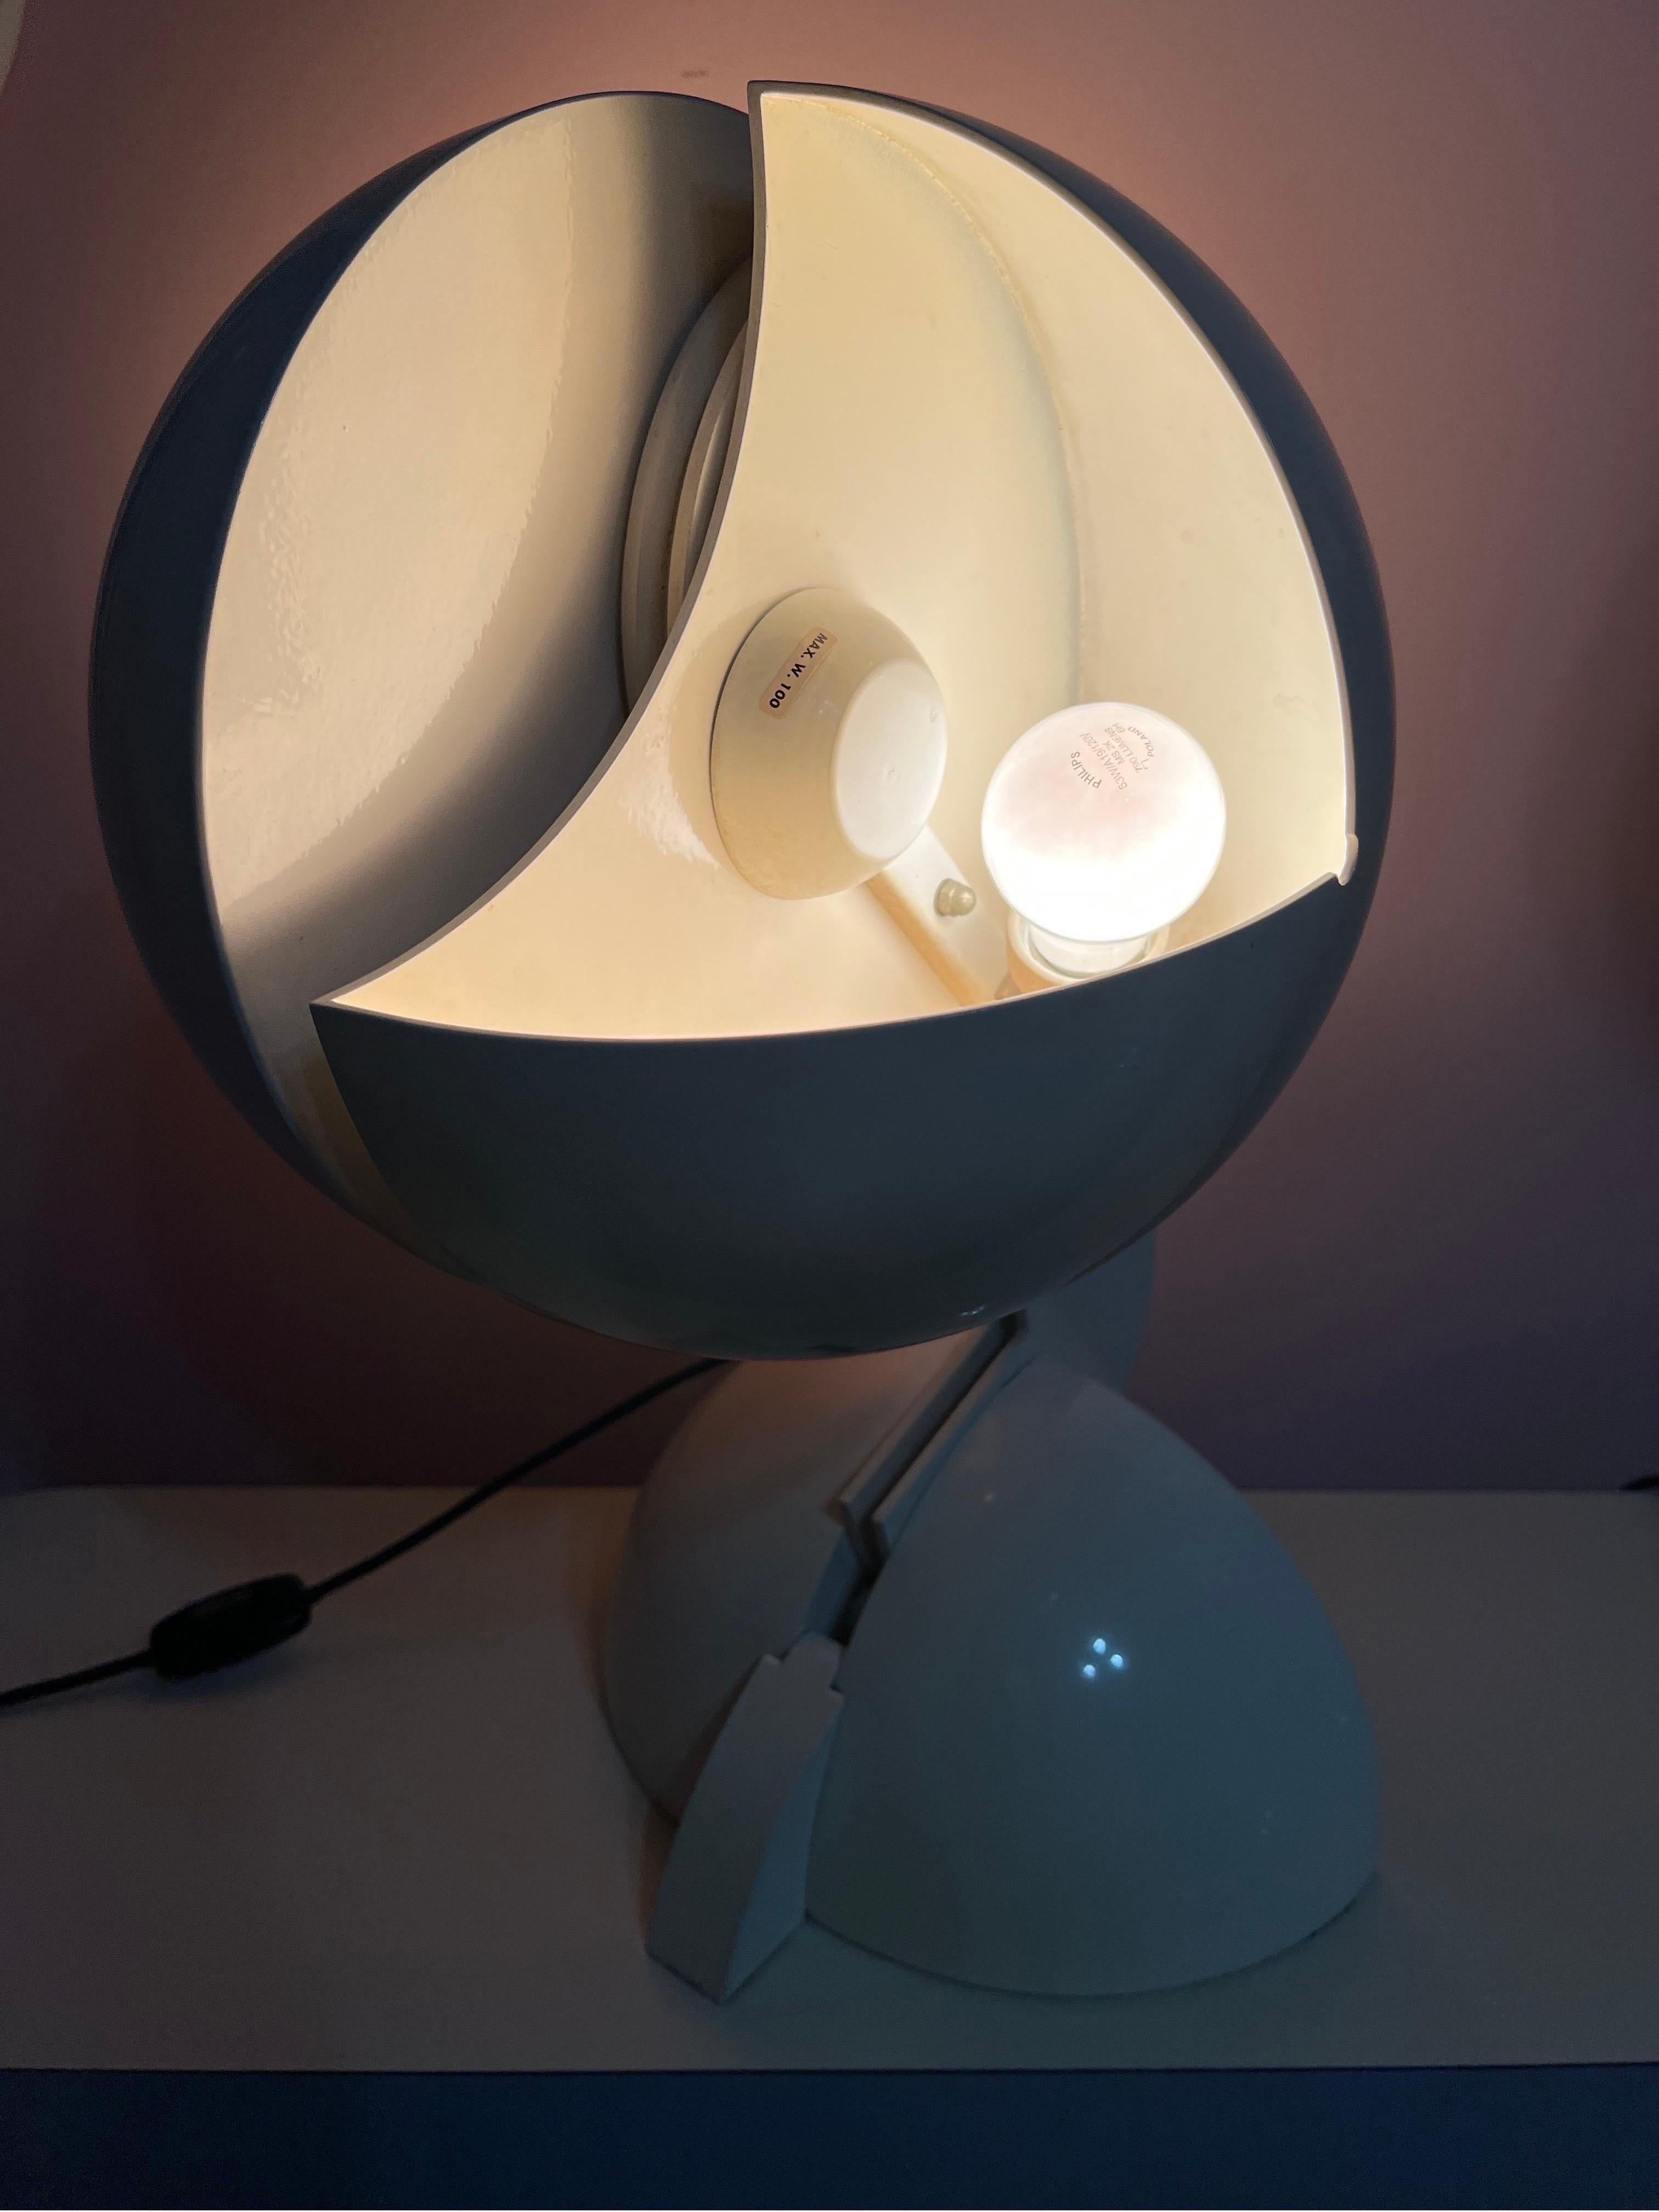 Late 20th Century La Ruspa Table Lamp by Gae Aulenti Manufactured by Martinelli Luce Italy, 1970s For Sale